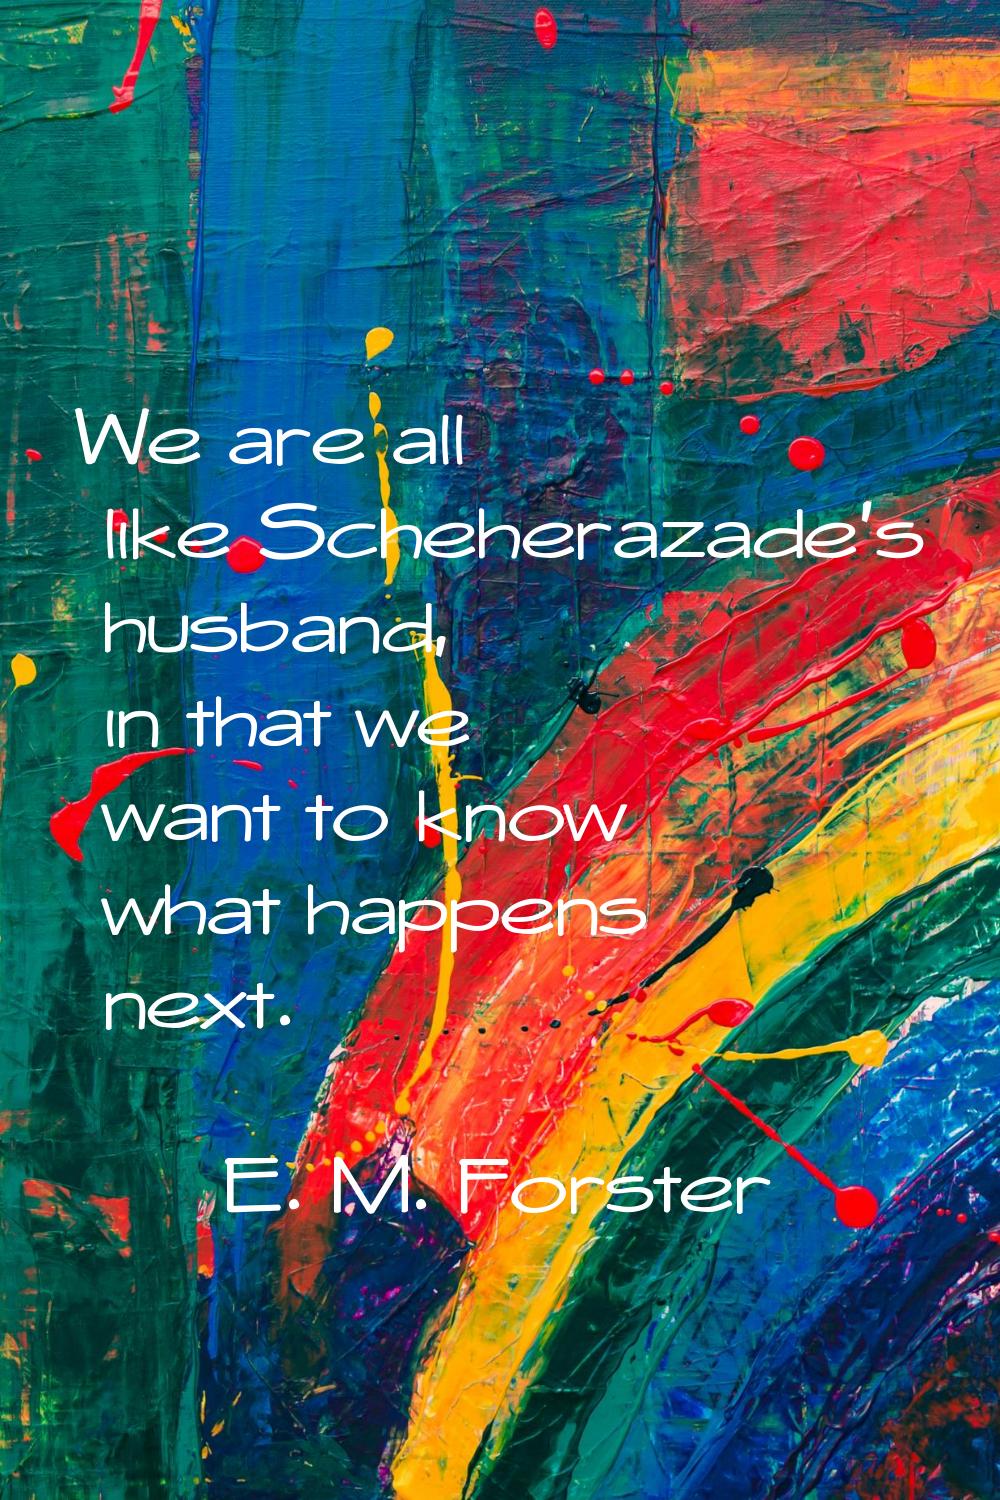 We are all like Scheherazade's husband, in that we want to know what happens next.